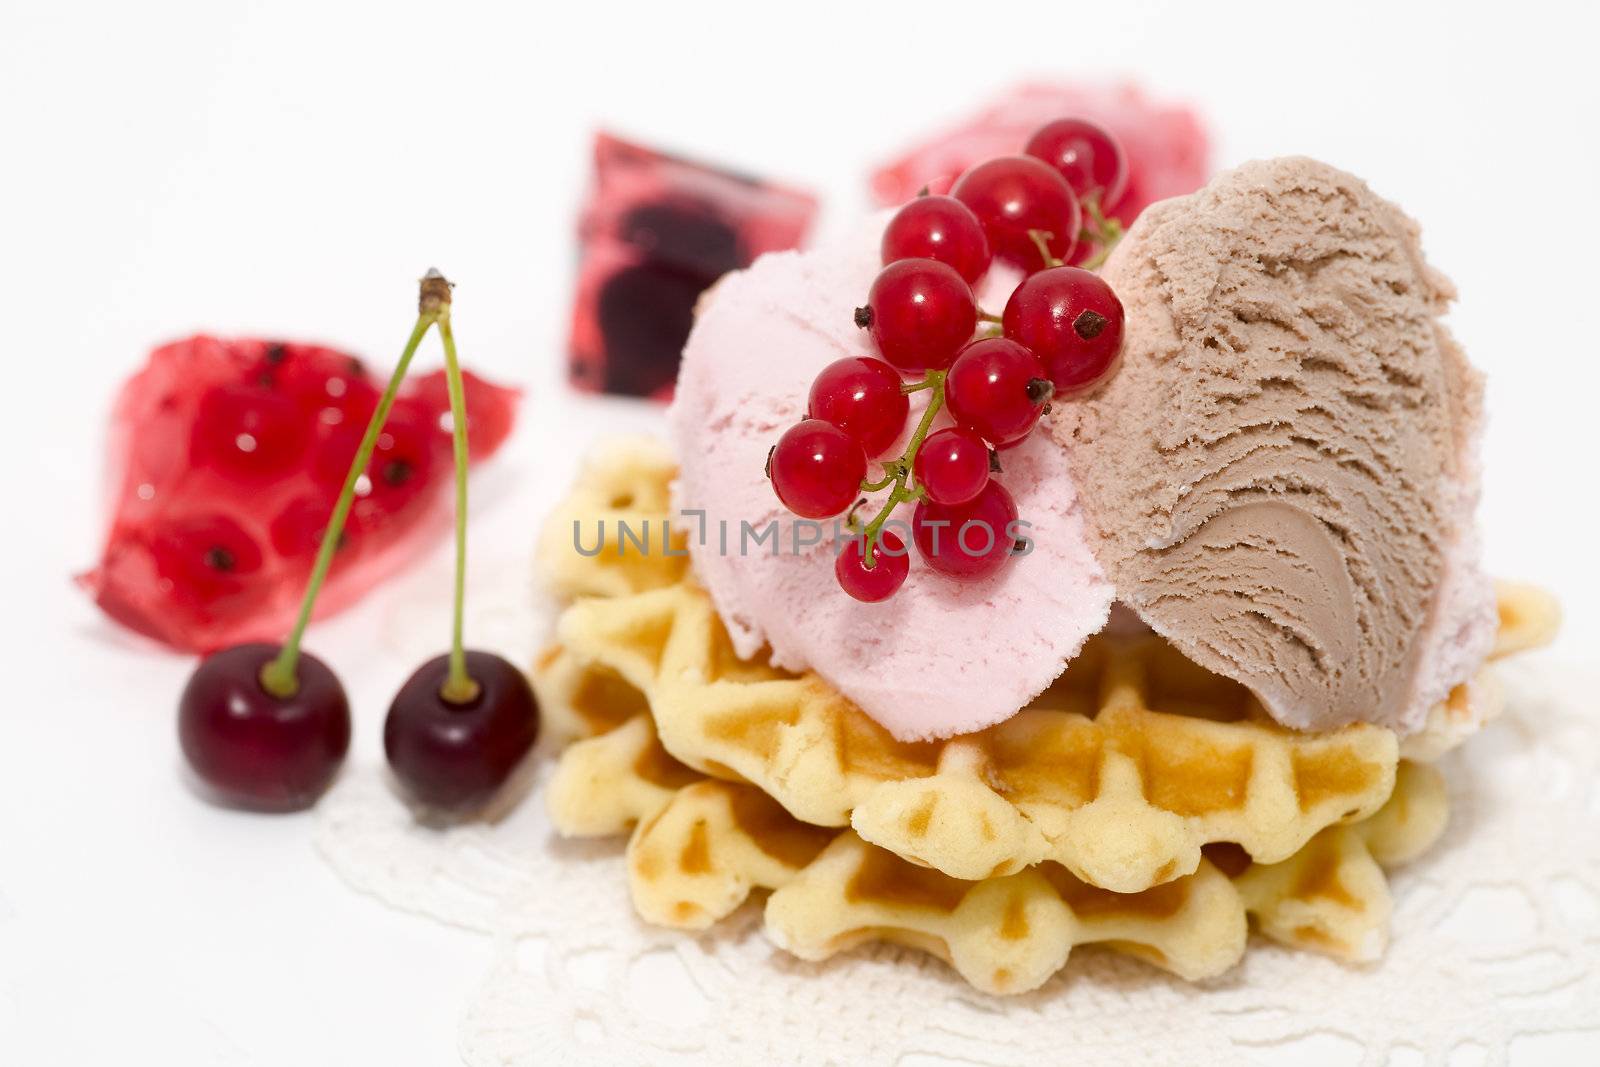 dessert consist of currant, ise-cream, cherry and waffles by foryouinf